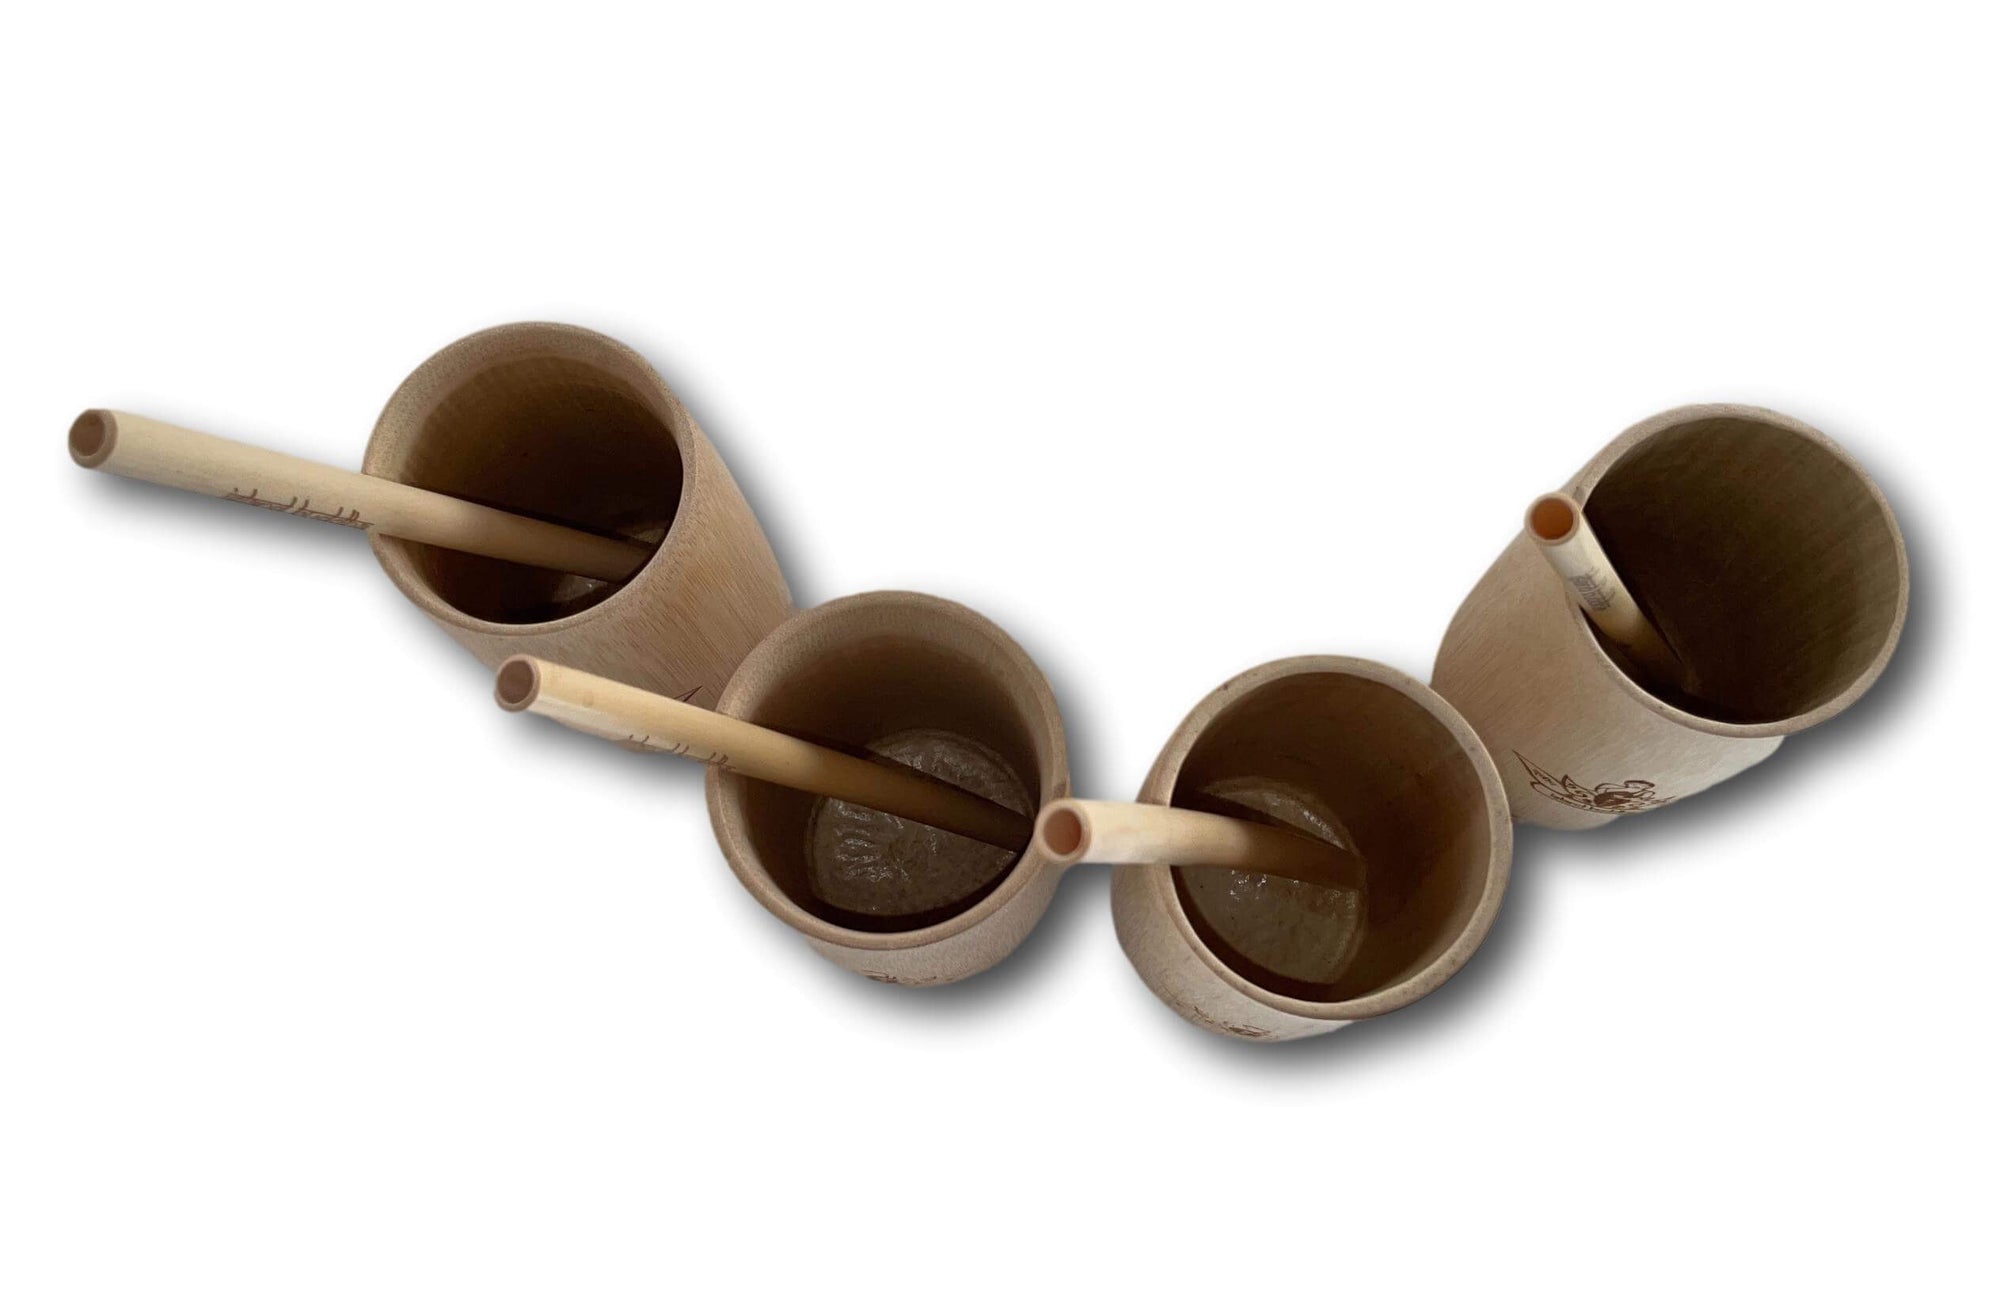 SET OF 4 ORGANIC BAMBOO DRINKING CUPS WITH STRAWS - REUSABLE & SUSTAINABLE + SINGING BOWLS AND MEDITATION